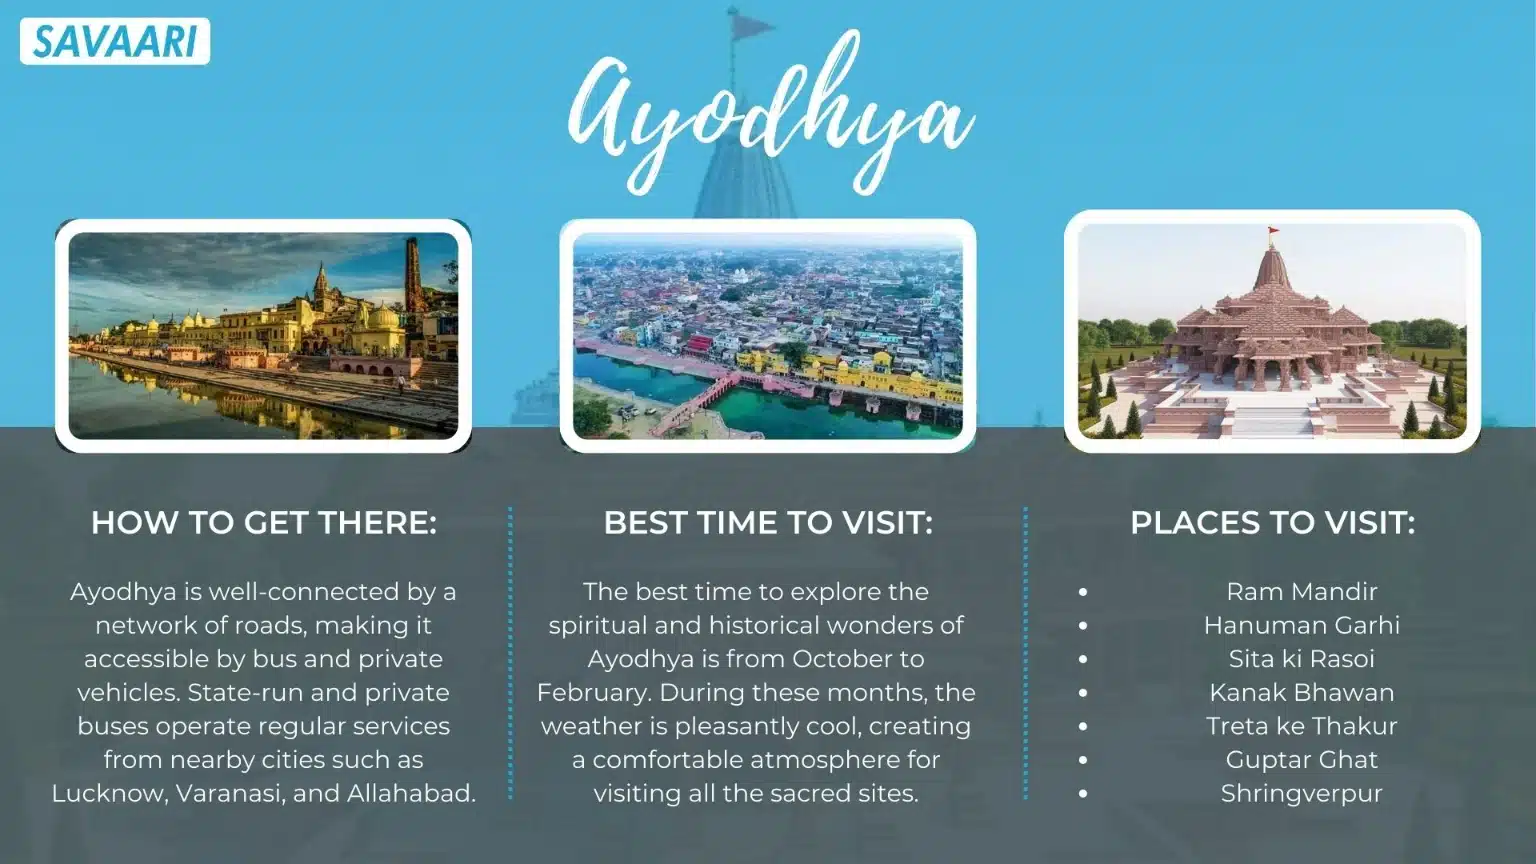 Things to do in Ayodhya